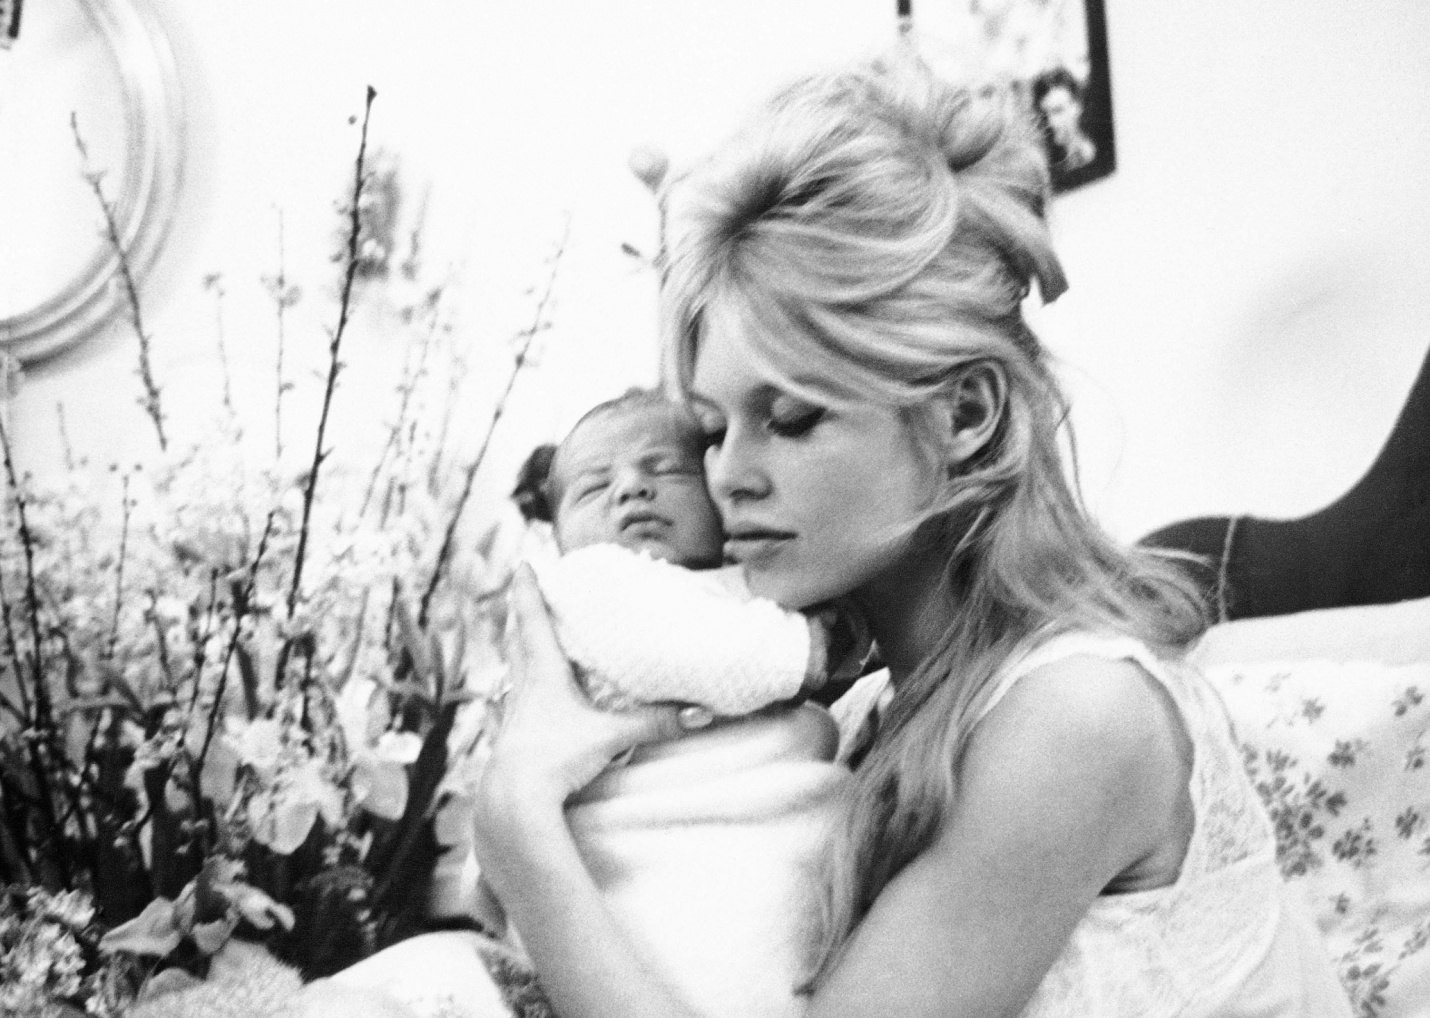 On 11 January 1960 Bardot gave birth to her only child, Nicolas. Here she is cuddling him in her Paris apartment..